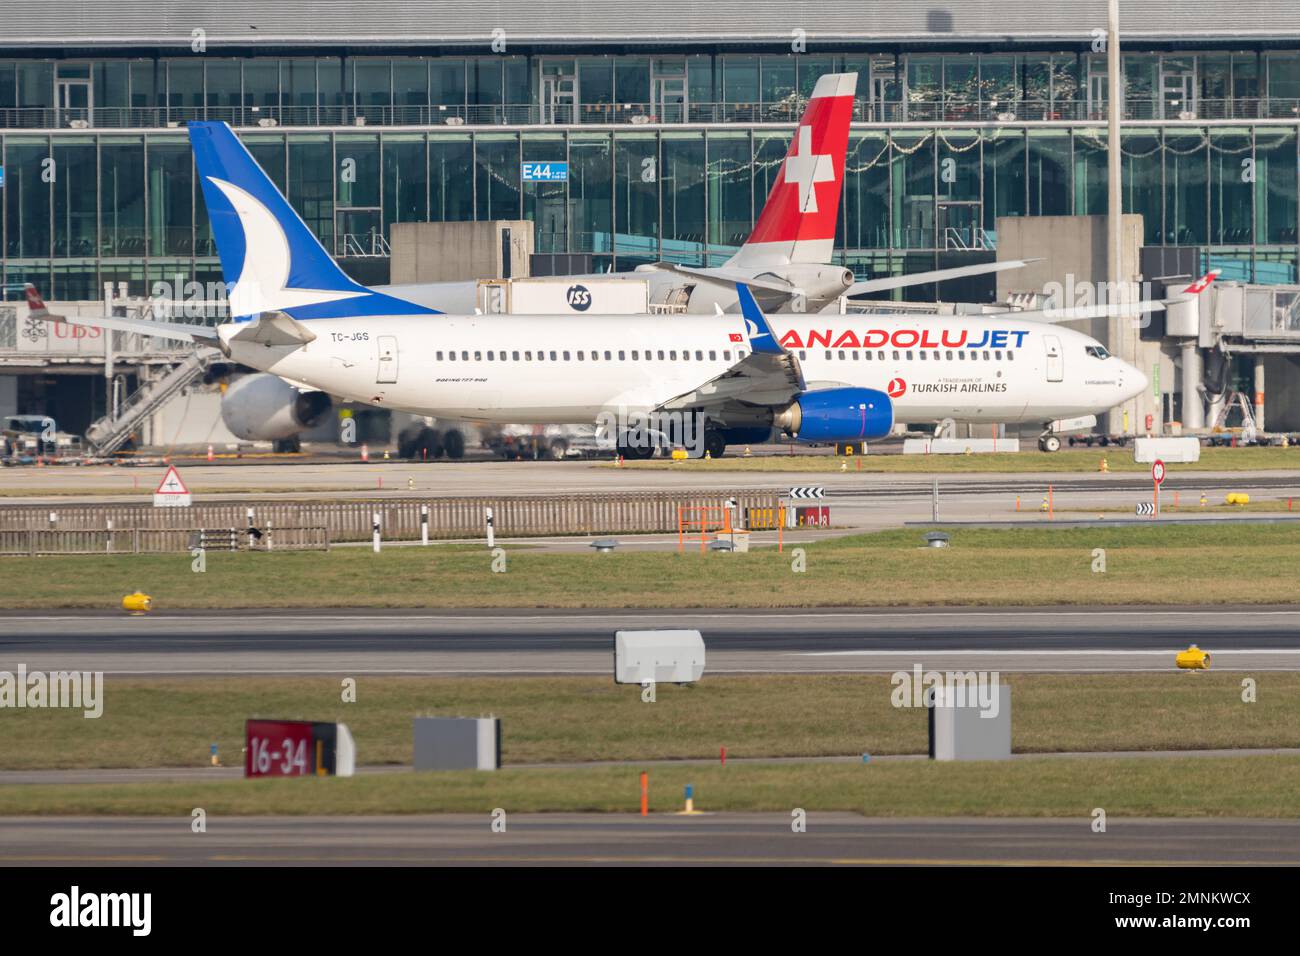 Zurich, Switzerland, January 19, 2023 Anadolu jet Boeing 737-8F2 aircraft is taxiing to its position Stock Photo